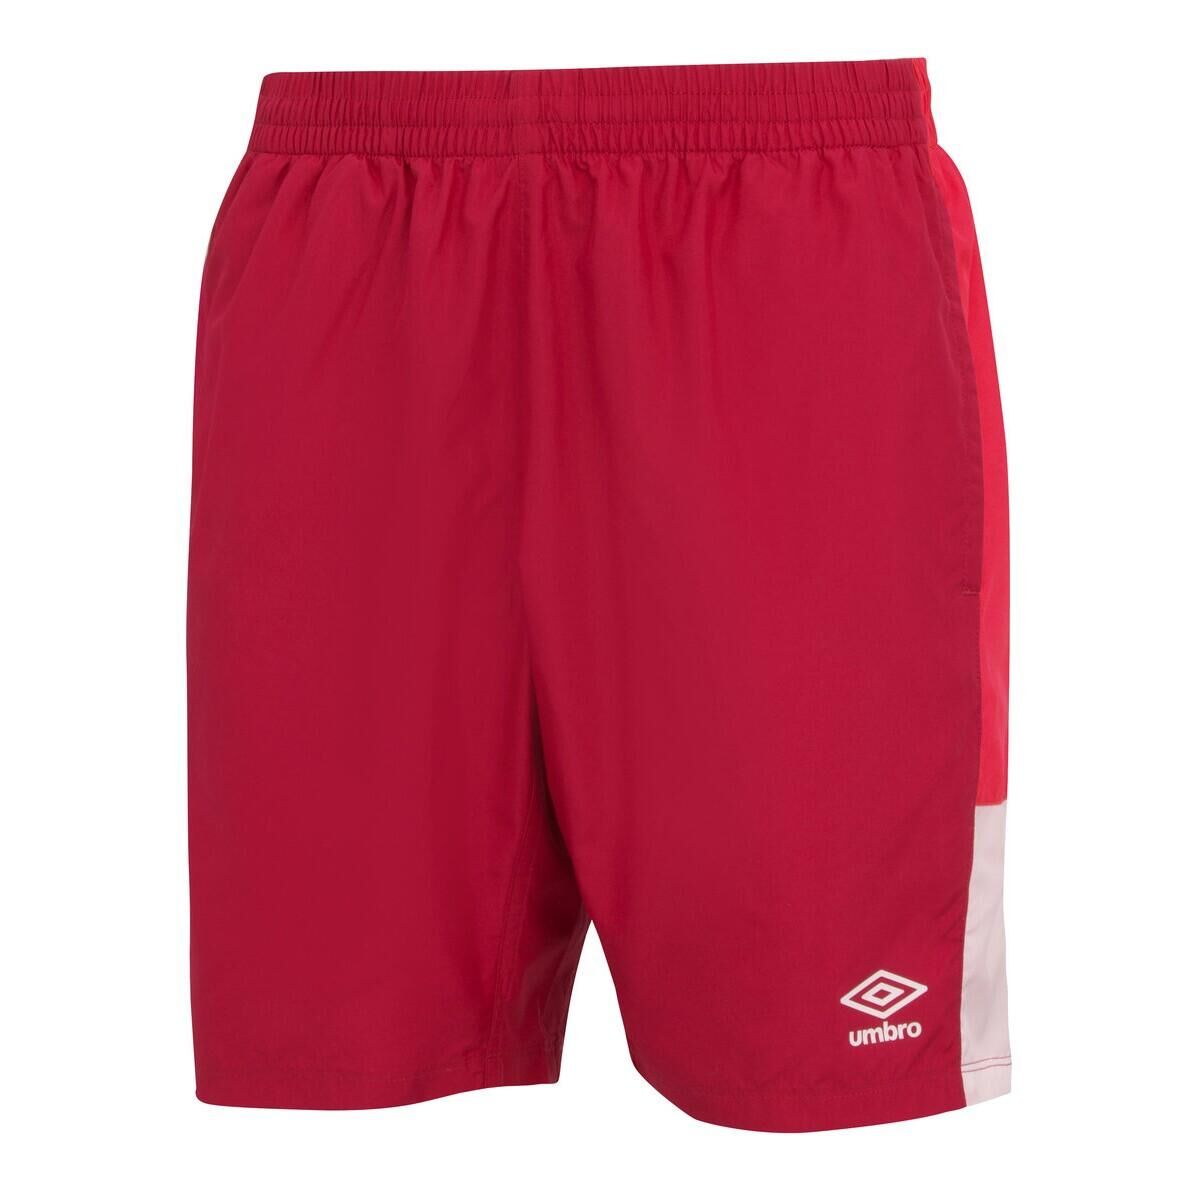 UMBRO Mens Training Rugby Shorts (Jester Red/Vermillion/White)